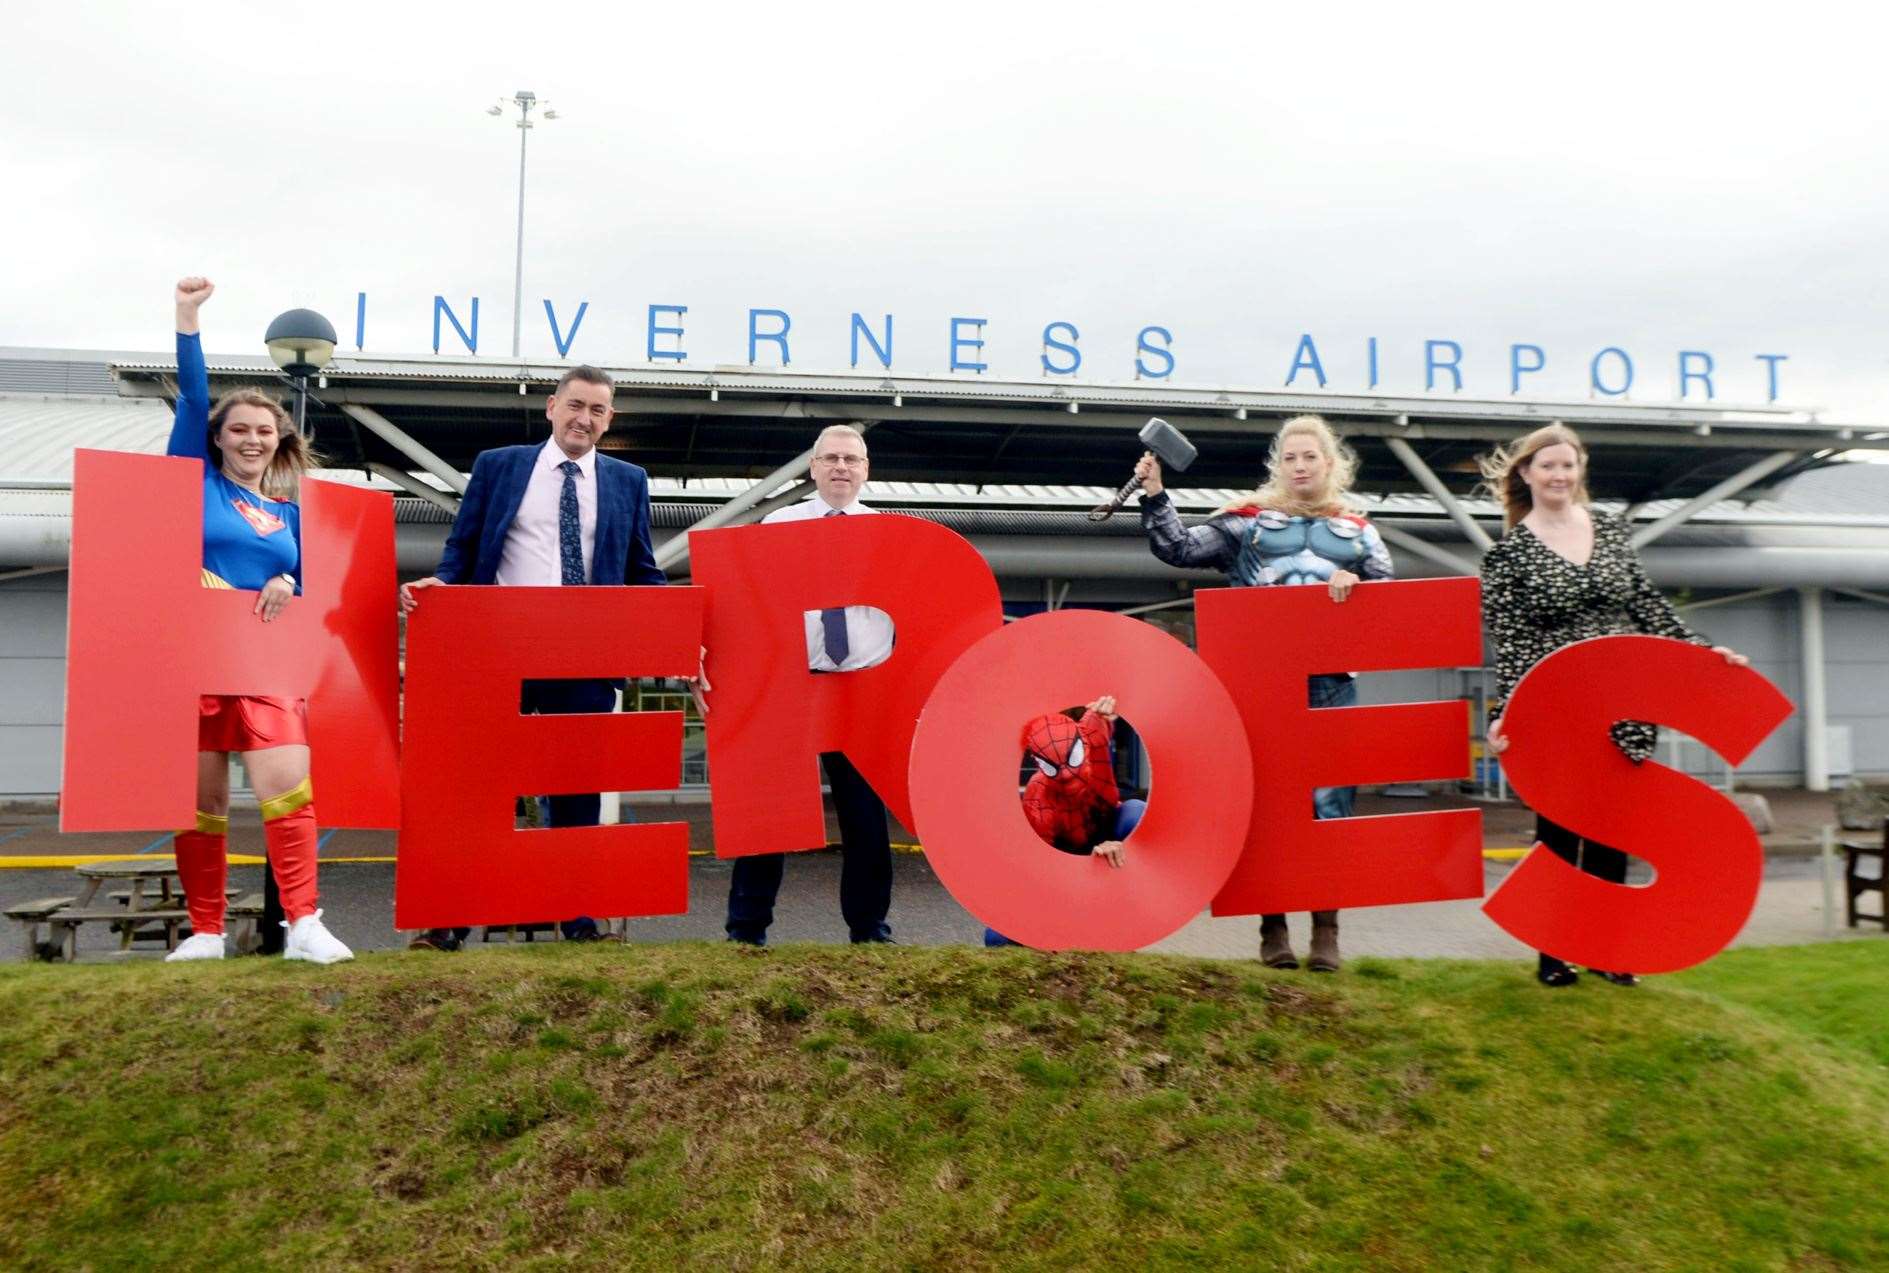 Graeme Bell, Inverness Airport general manager, Davie Geddes, terminal operations manager and Cheryl Campbell, airport services manager, with super friends, launched Highland Heroes 2022. Picture: James Mackenzie